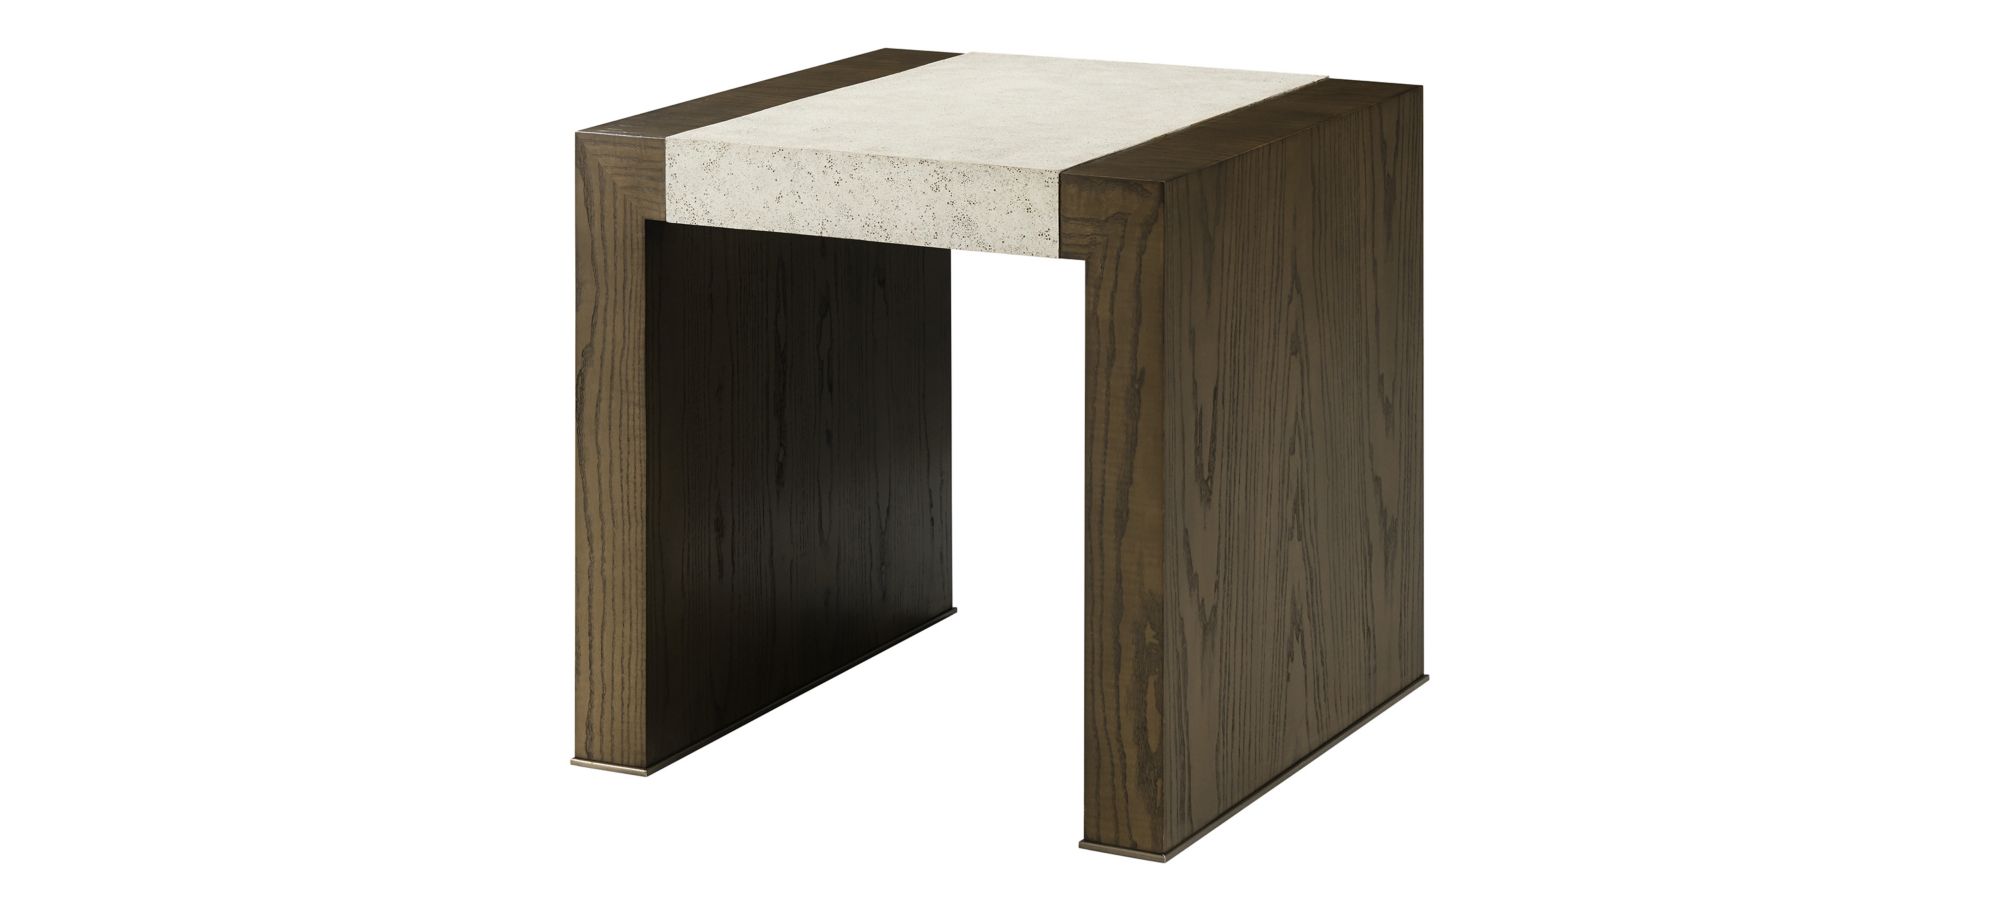 Catalina Side Table II in Earth by Theodore Alexander